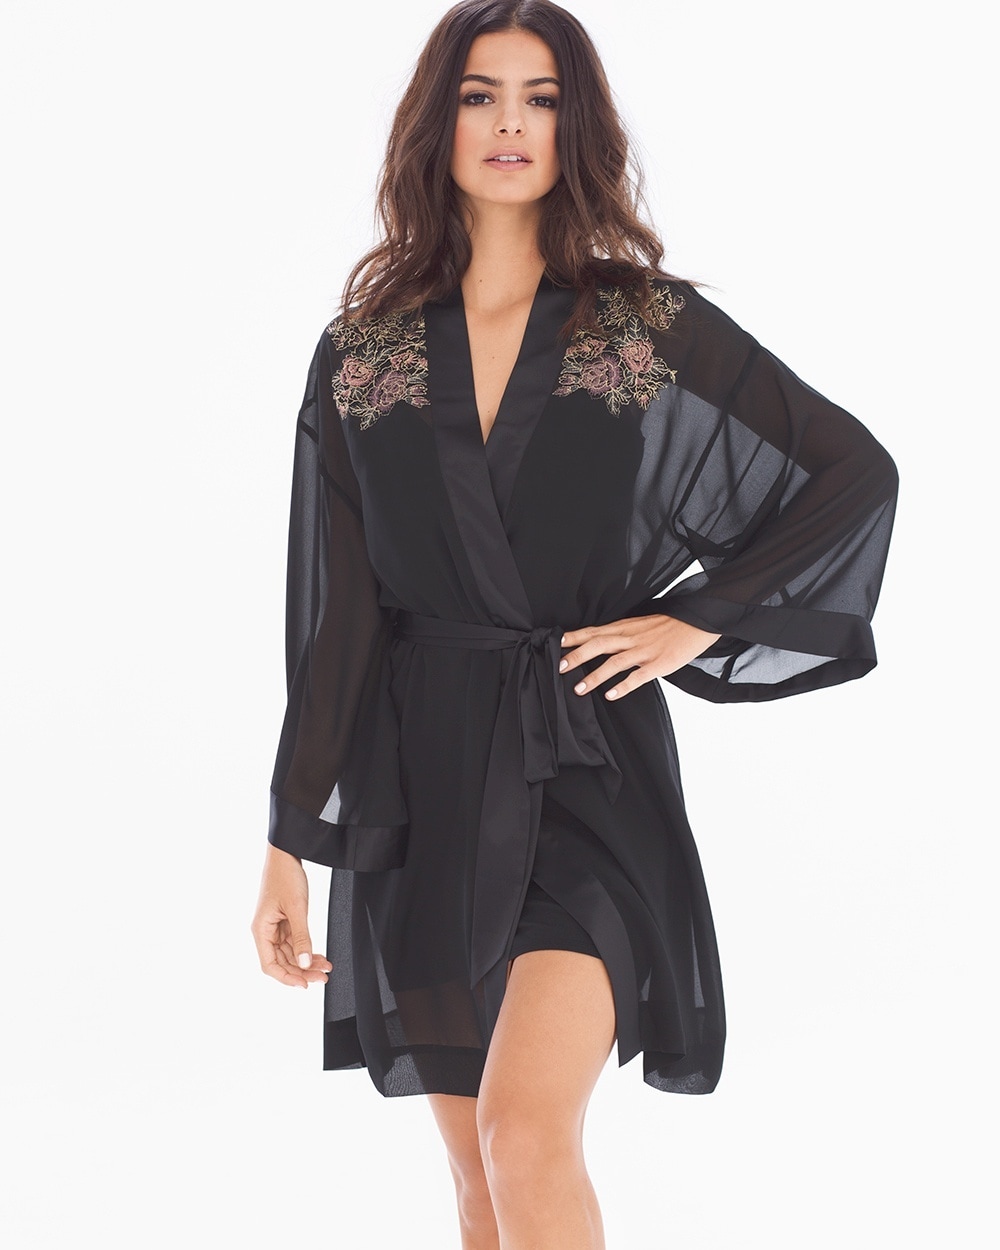 Limited Edition Lace Affaire Short Robe Black